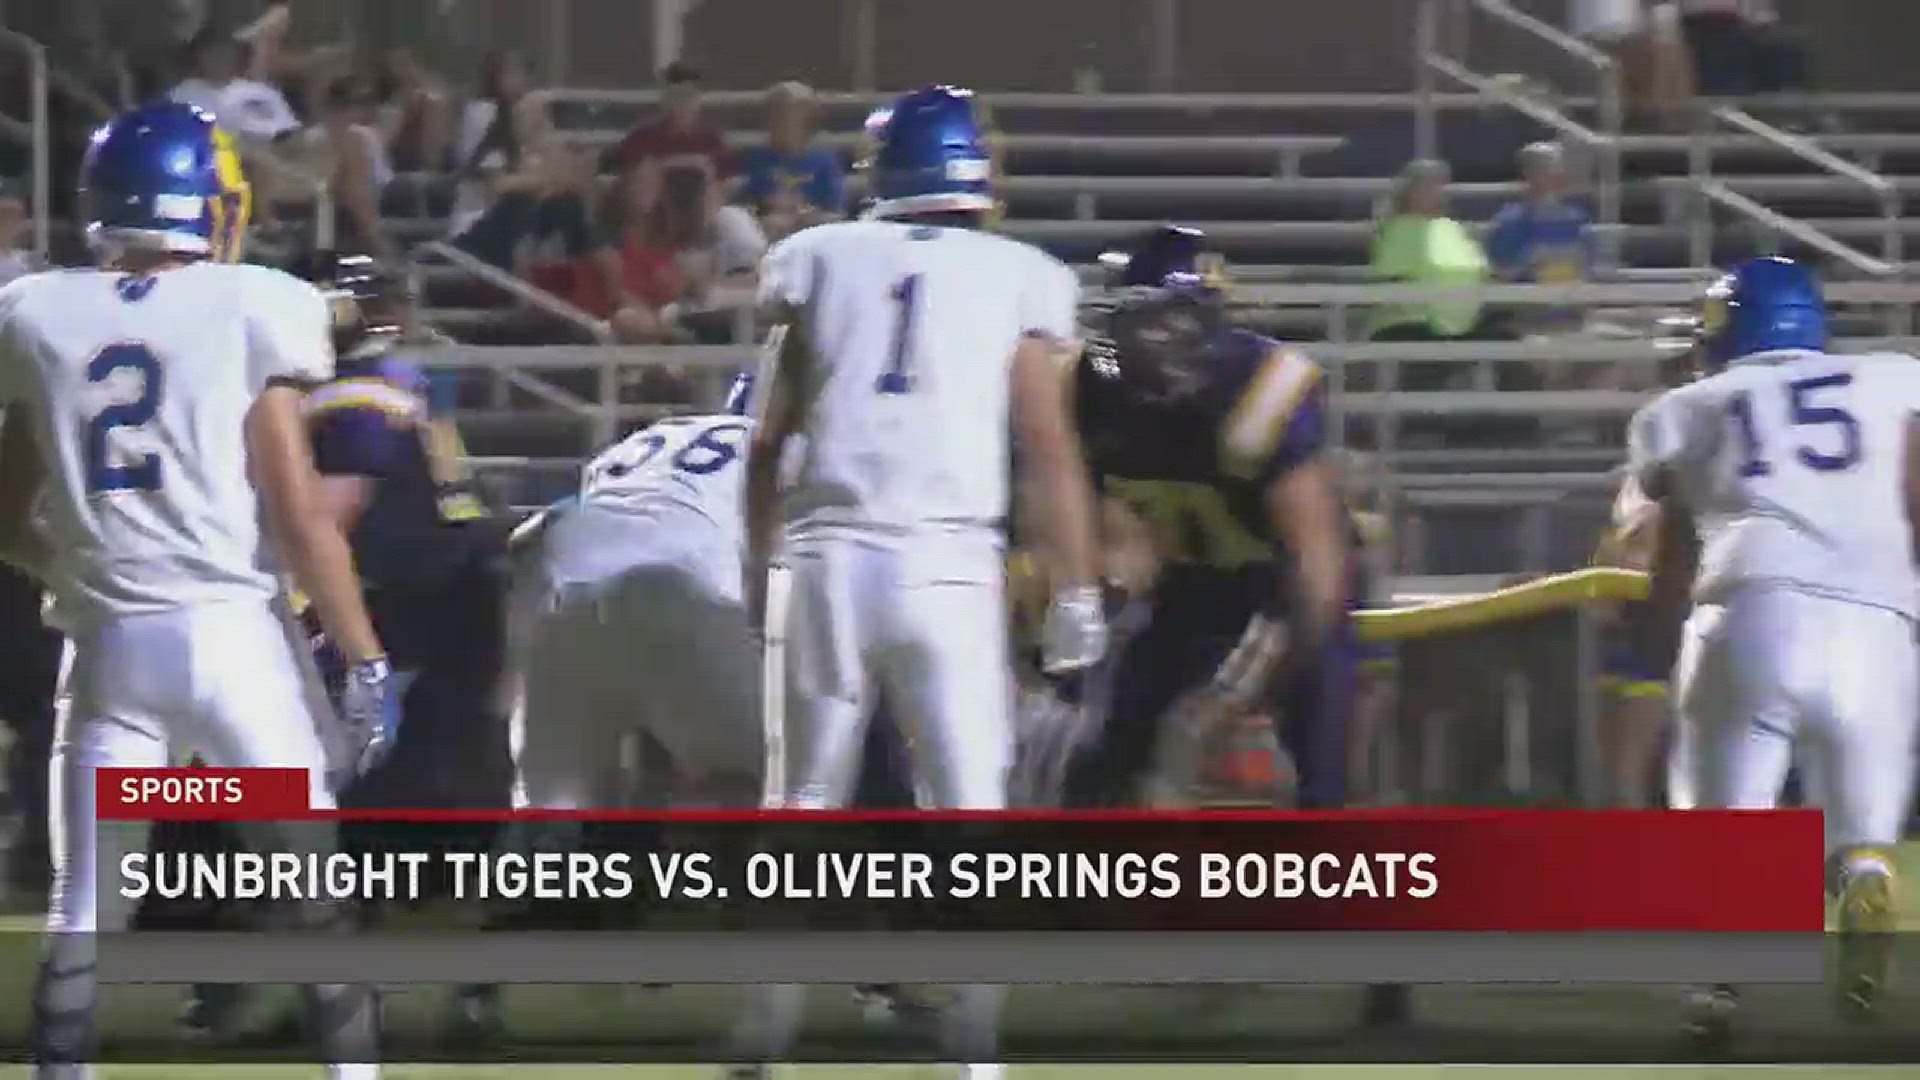 Oliver Springs defeats Sunbright 45-7.